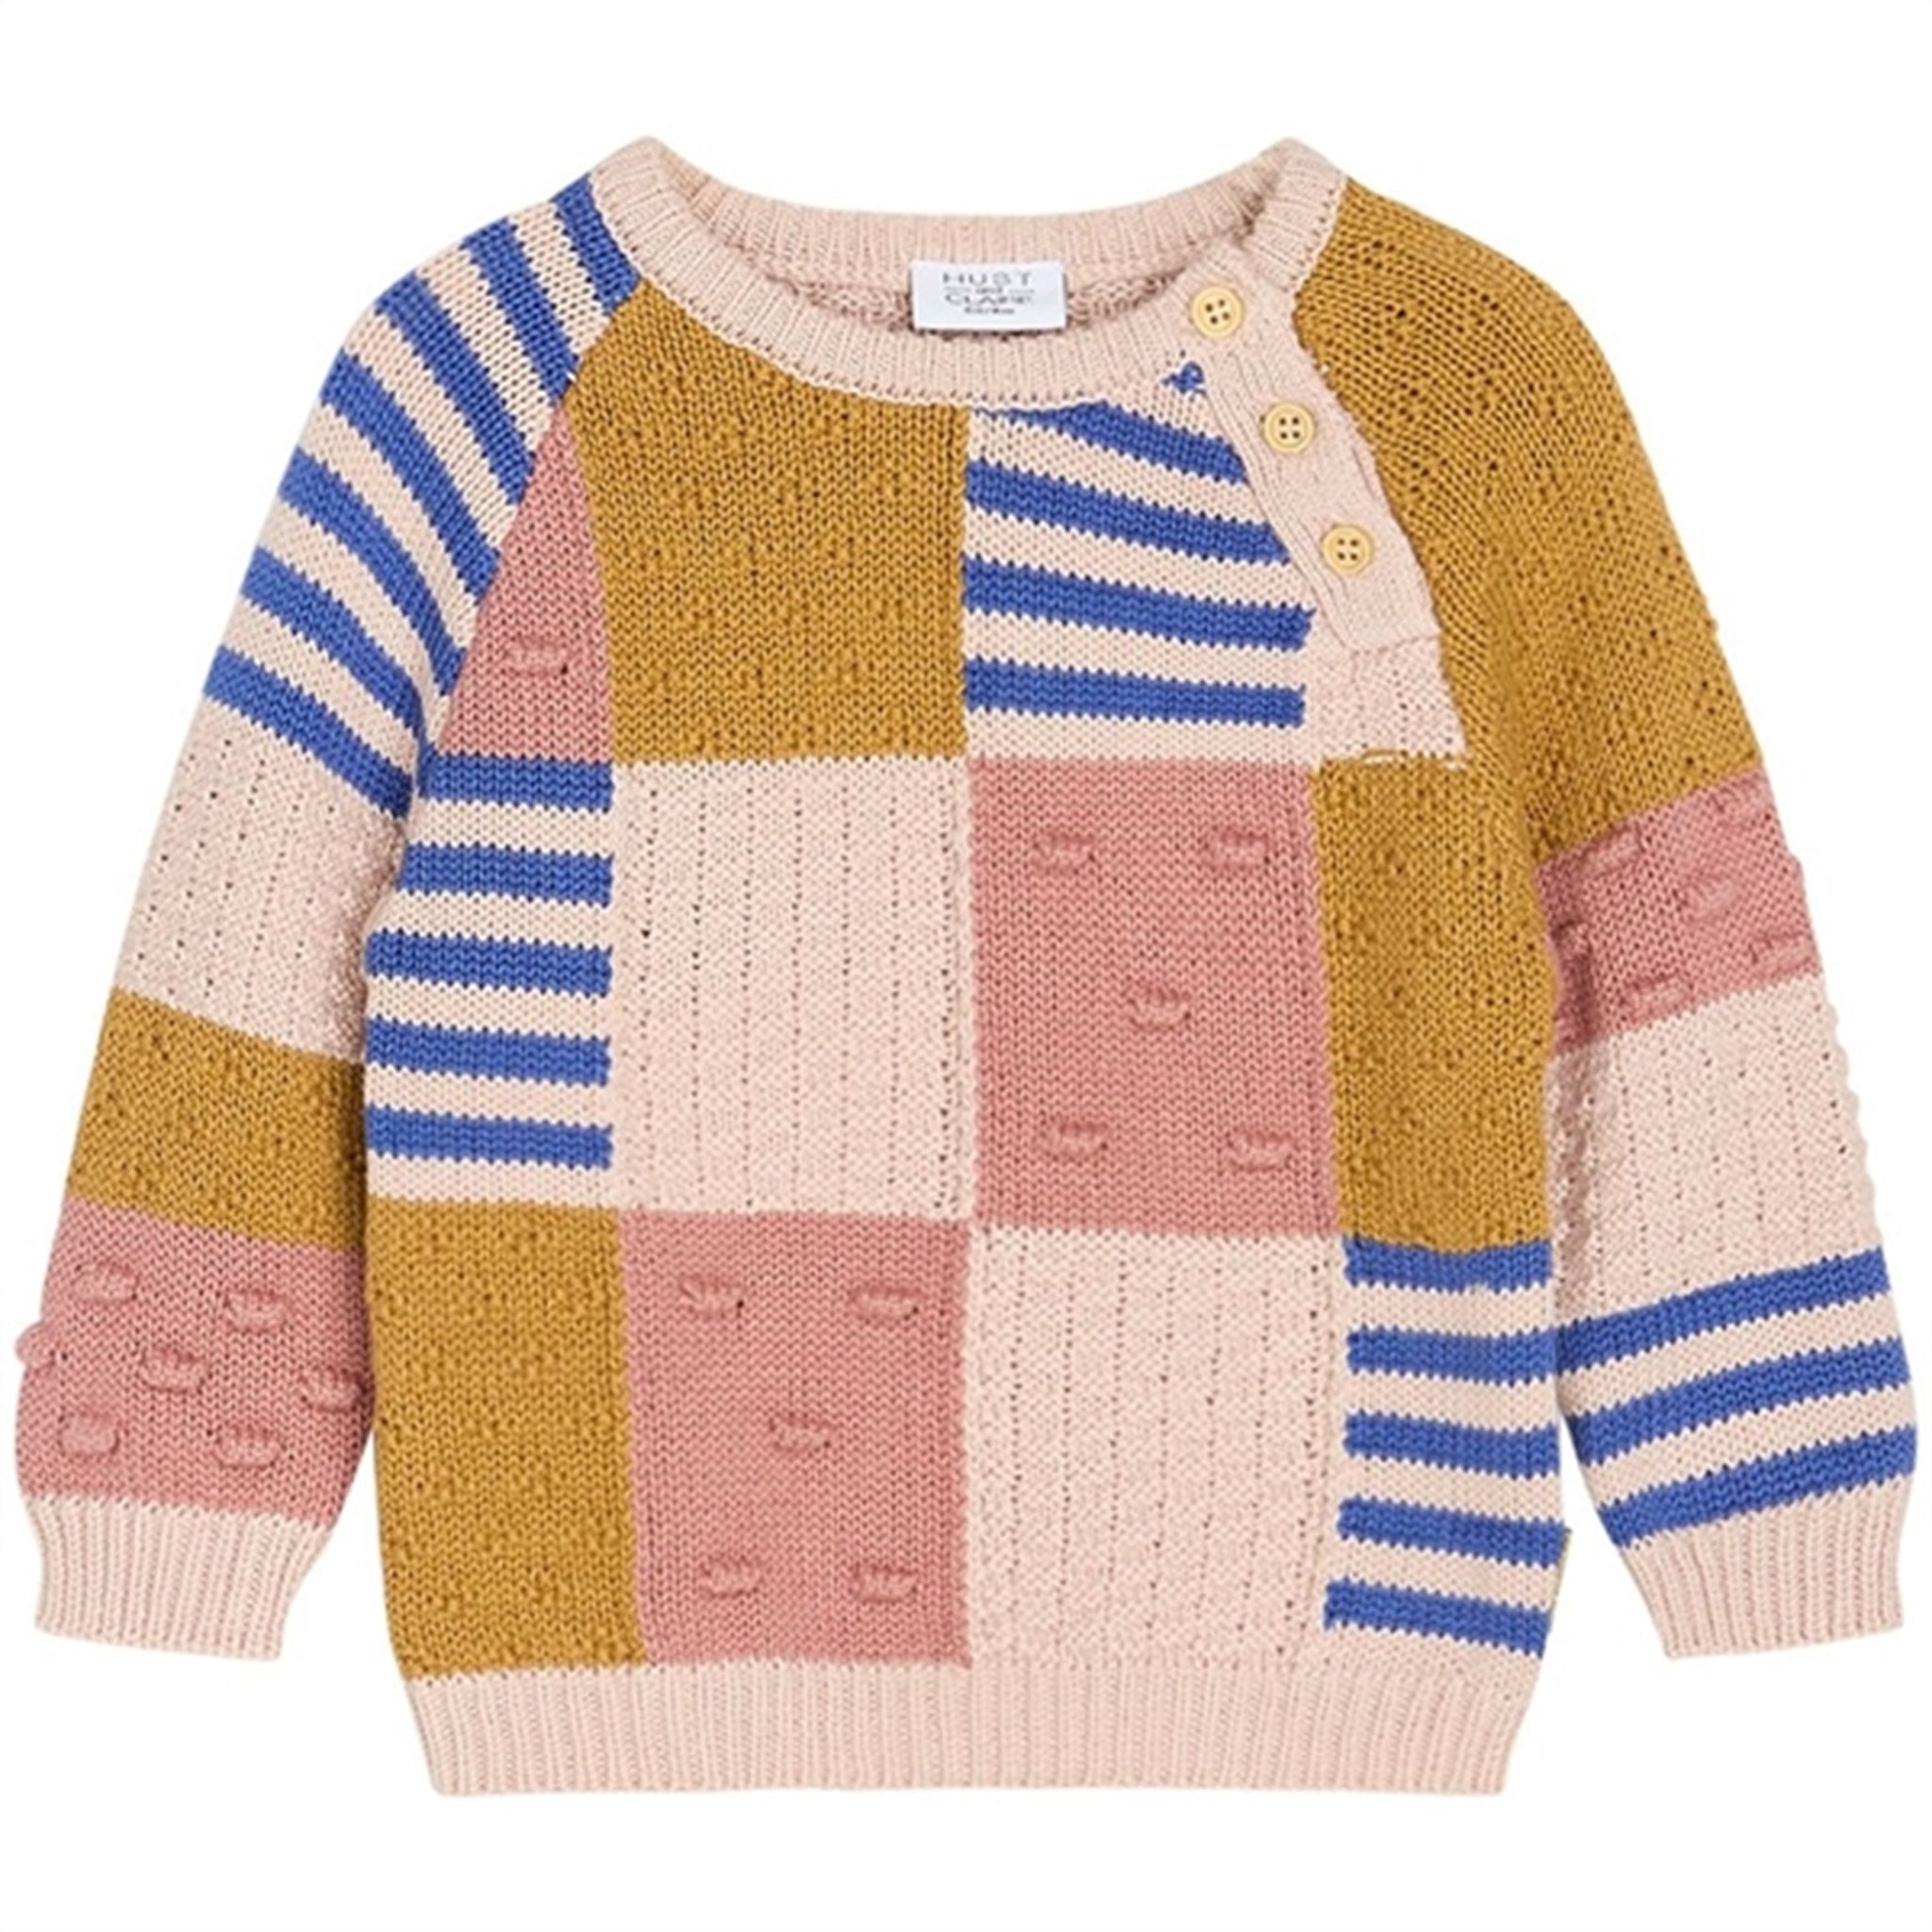 Hust & Claire Baby Peach Dust Nadiina Knit Sweater